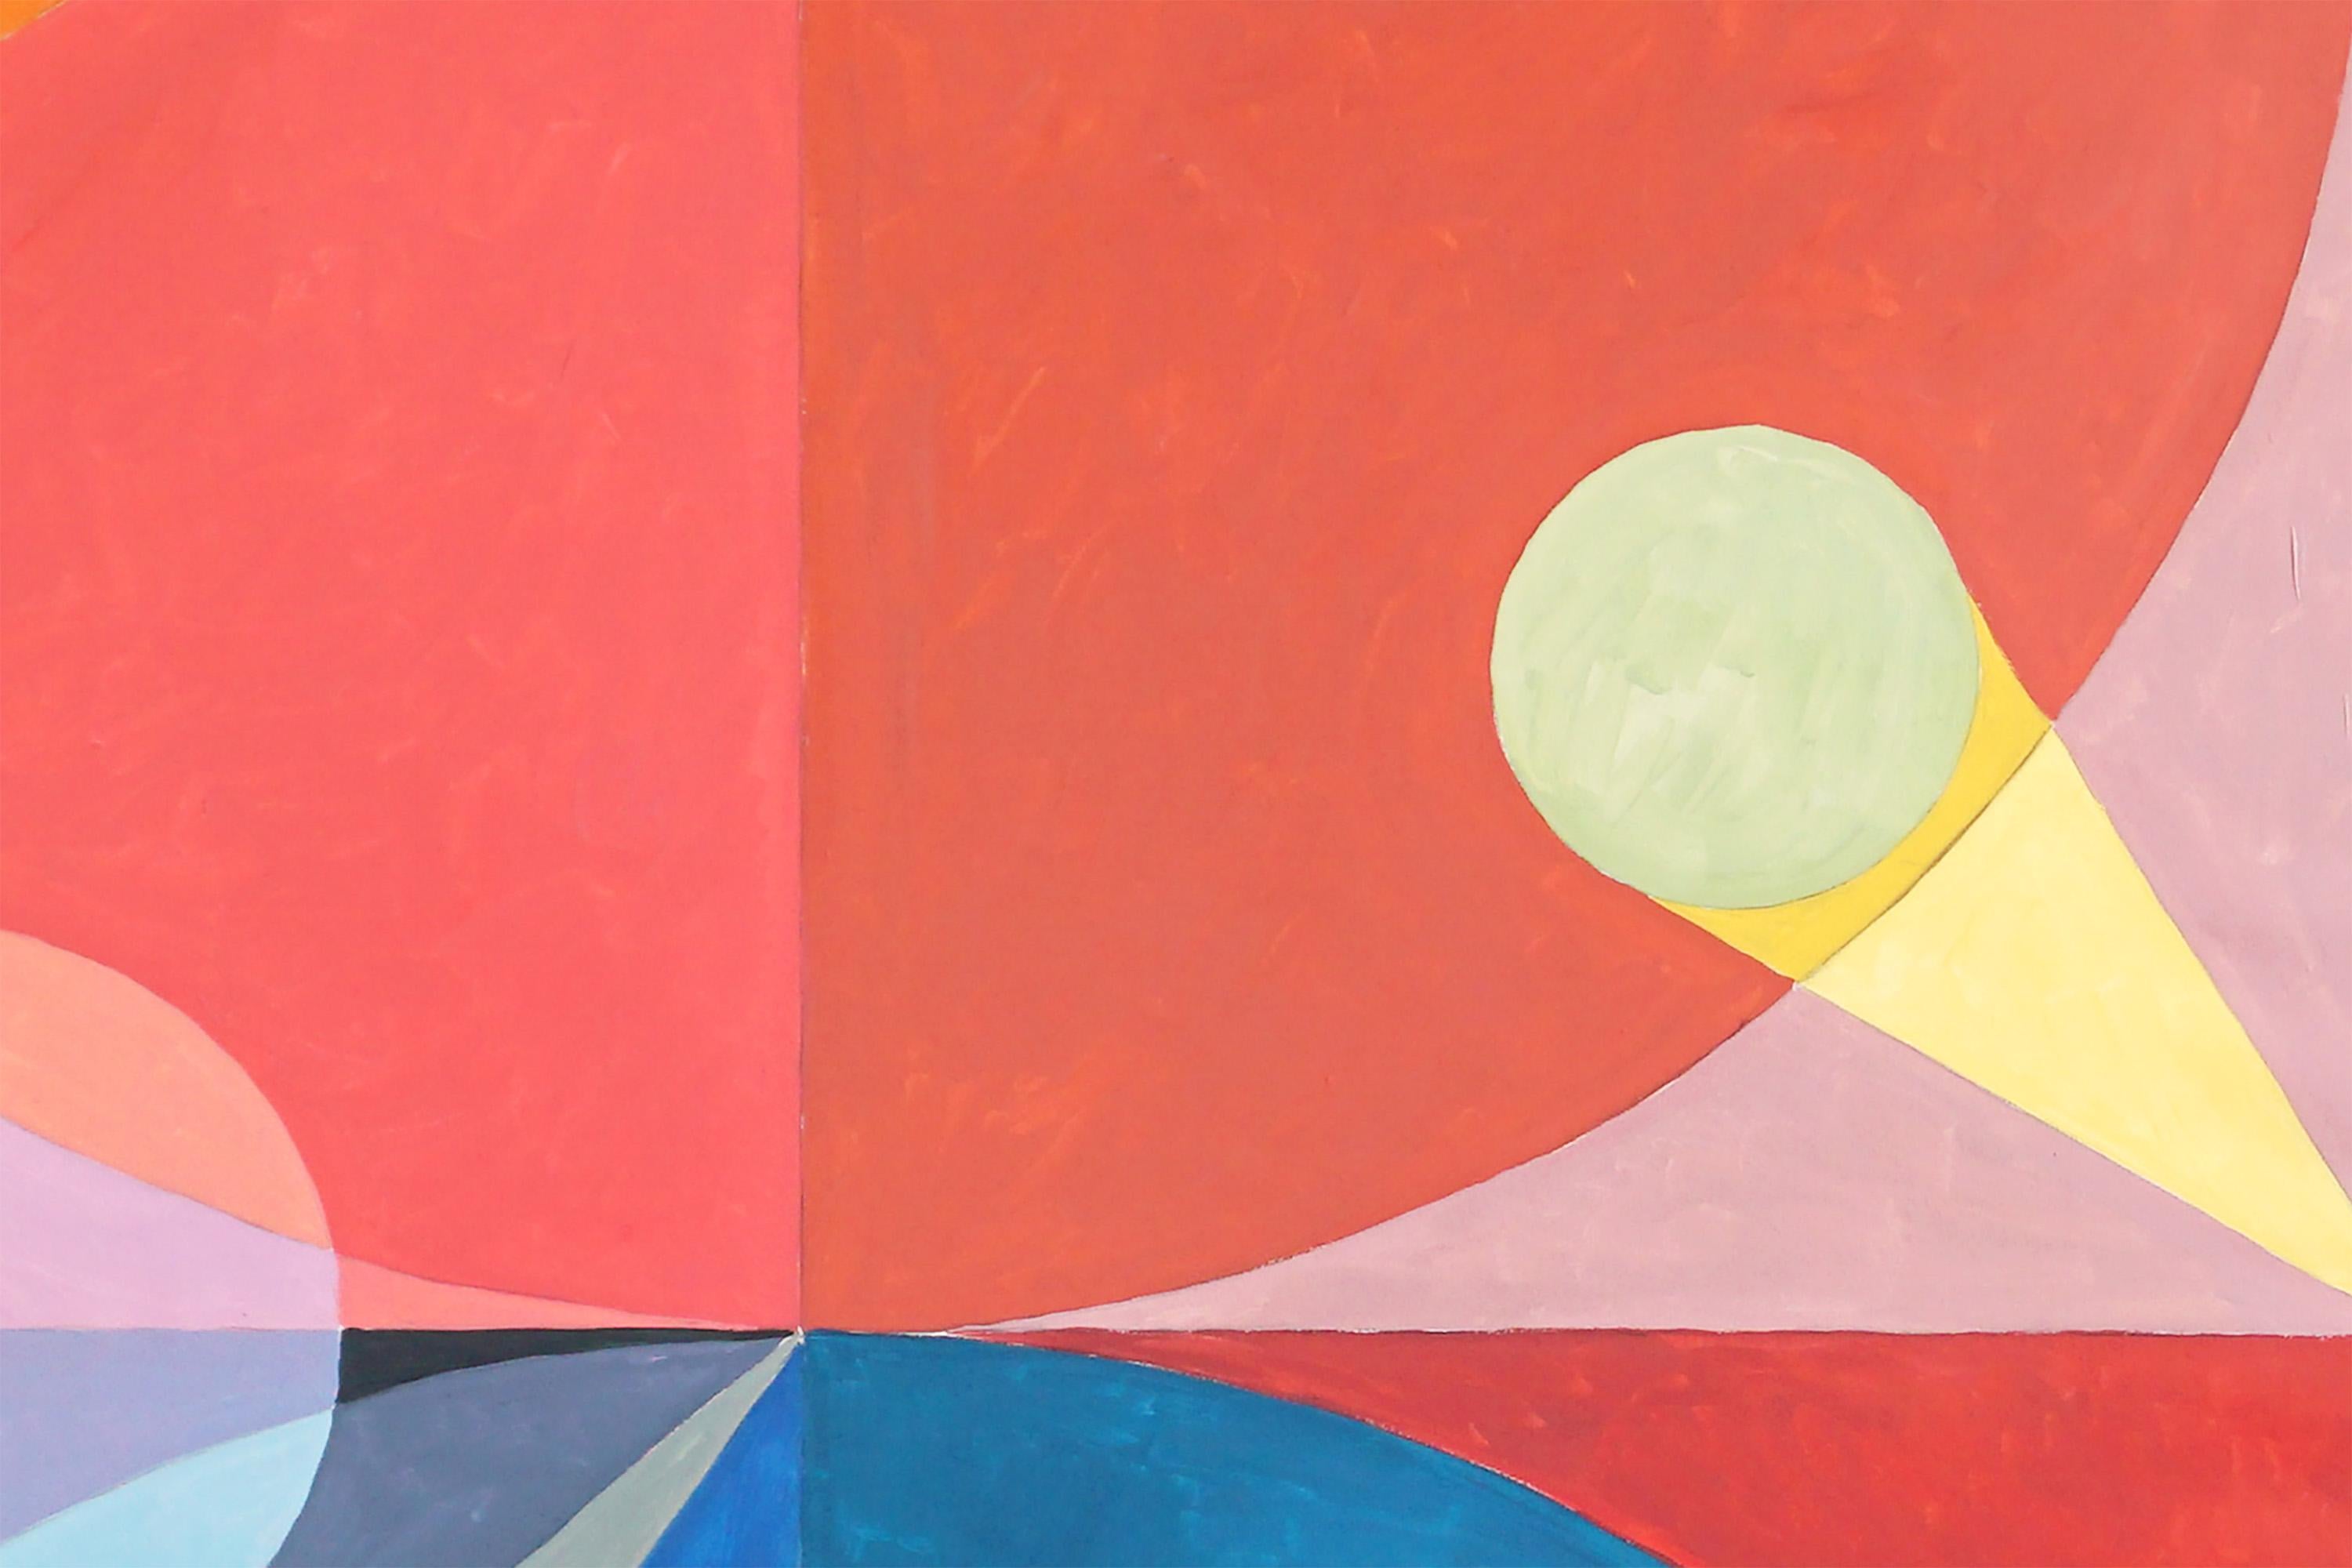 Constellation Forming over Santa Fe, Primary Bright Colors, Maths, Astronomy  - Abstract Geometric Painting by Natalia Roman